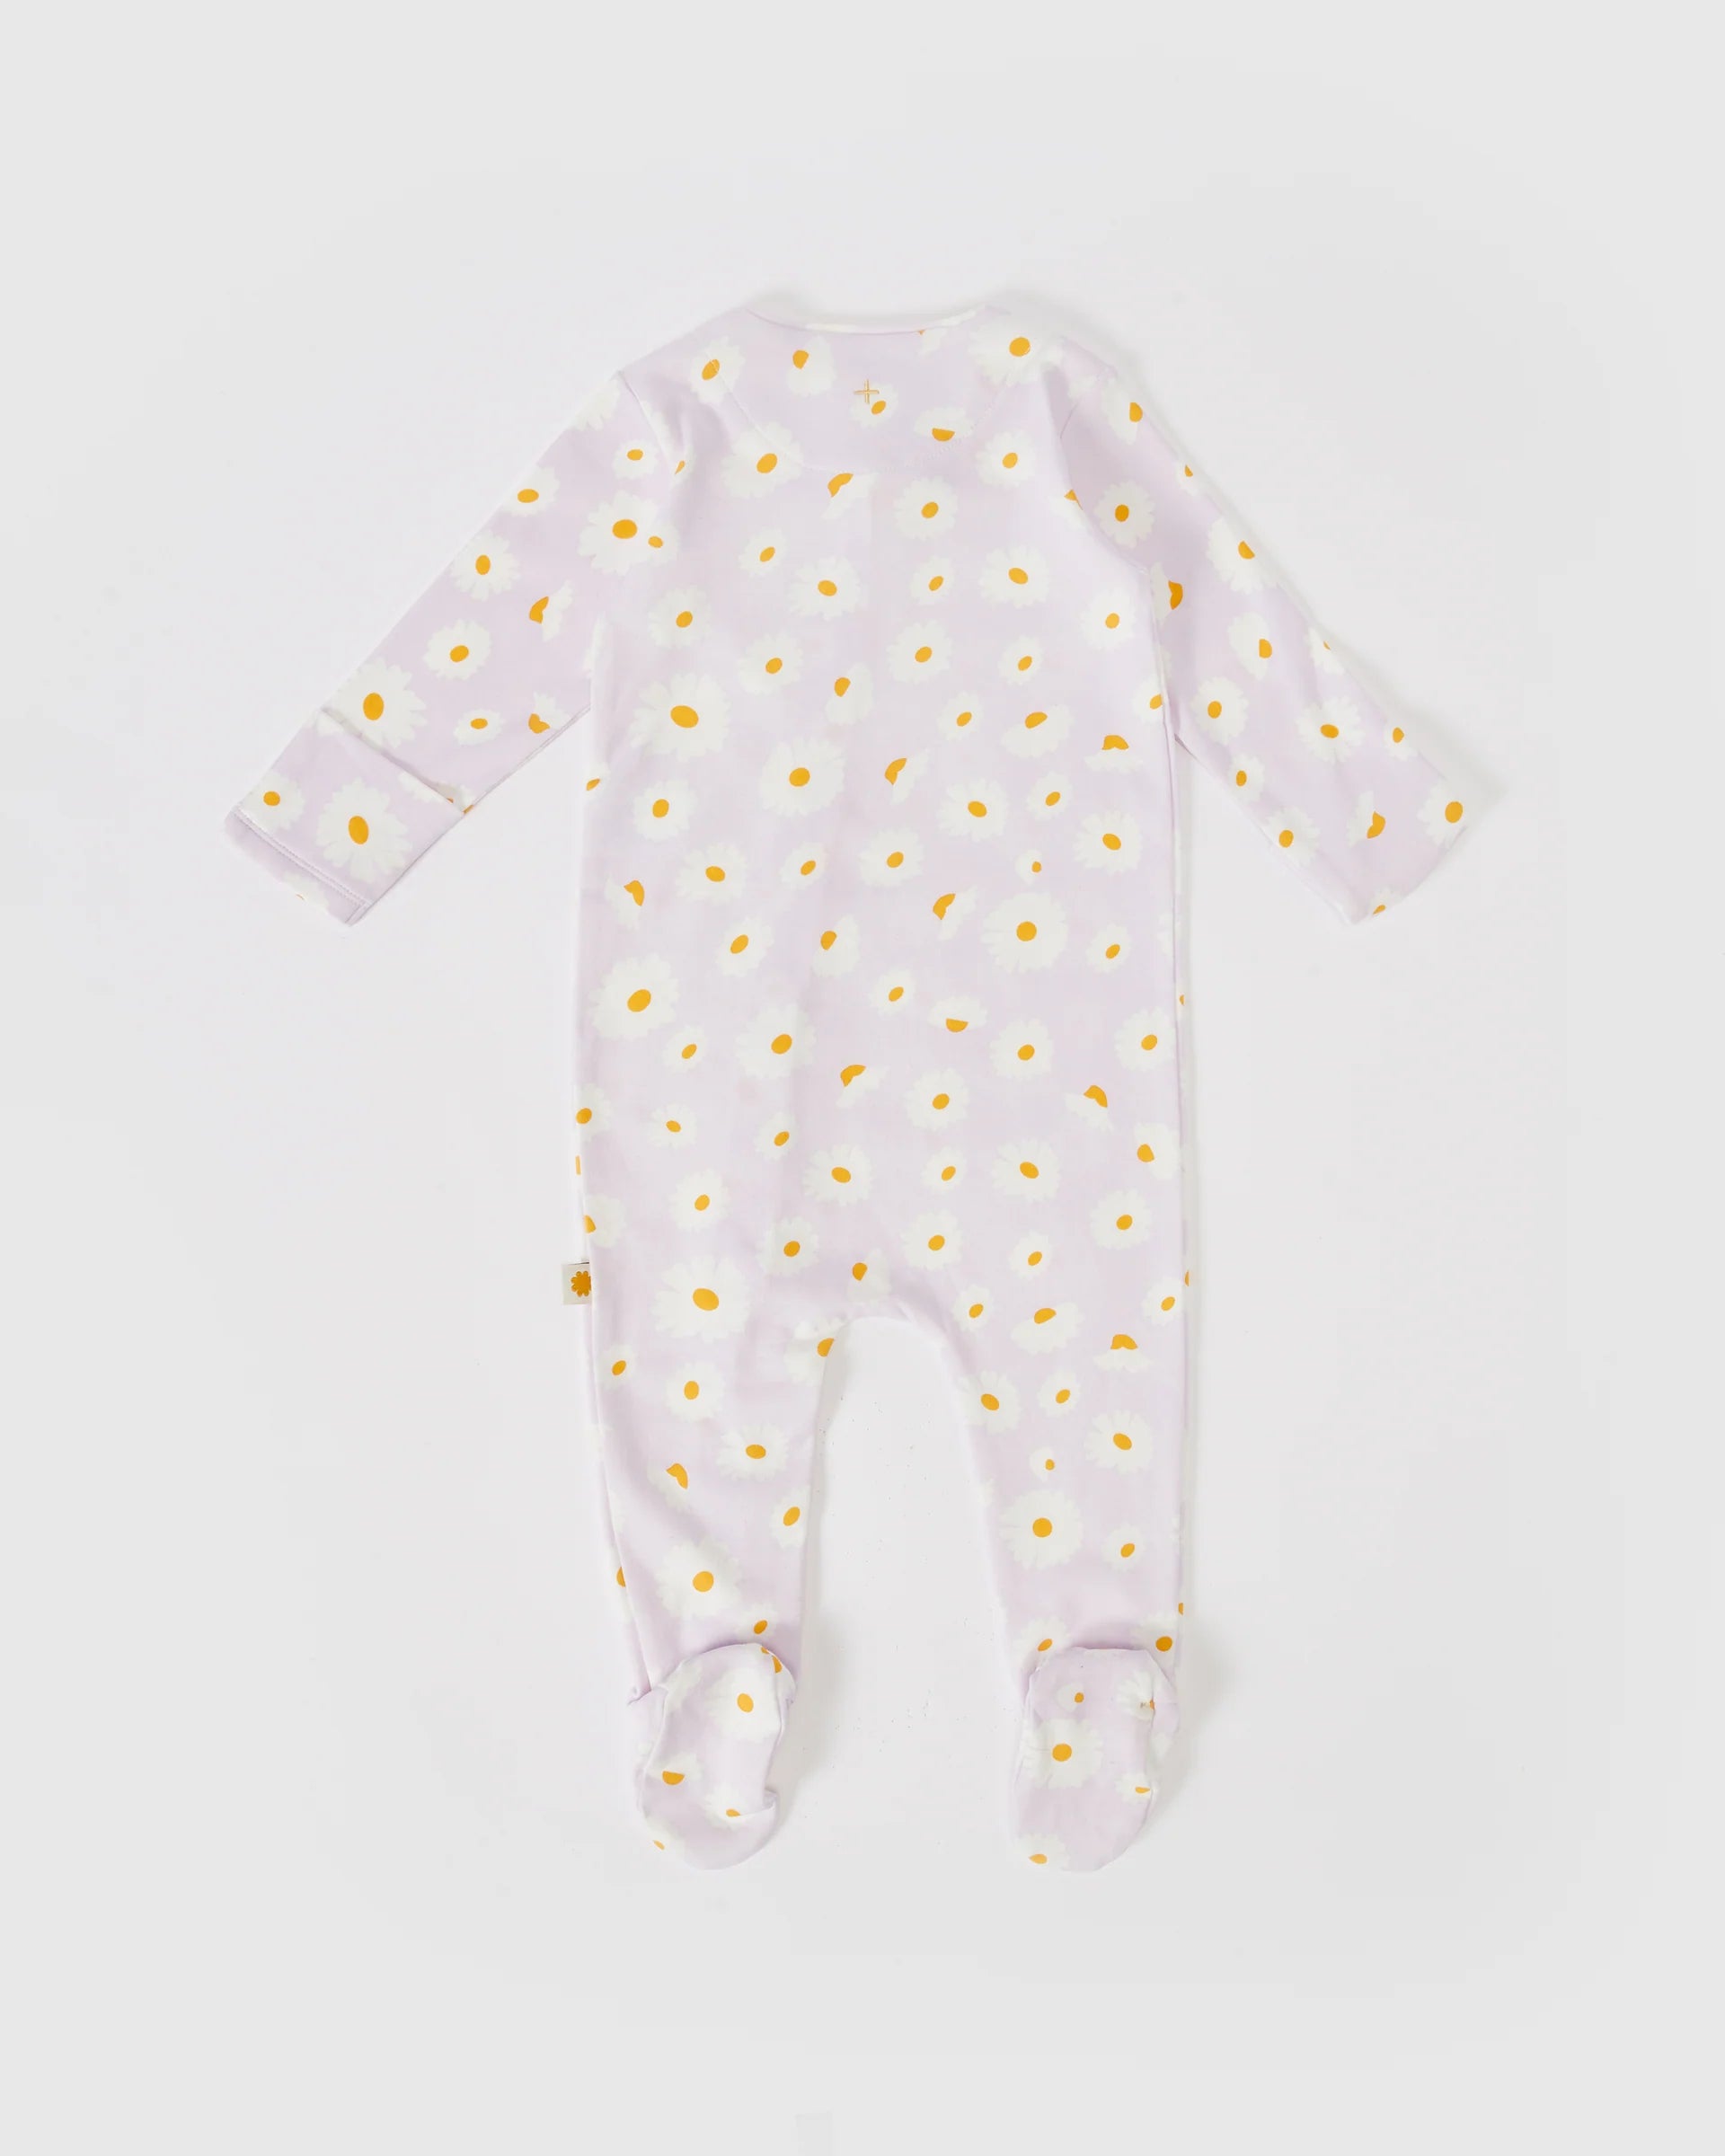 Goldie & Ace - Lavender Dancing Daisy Footer Romper